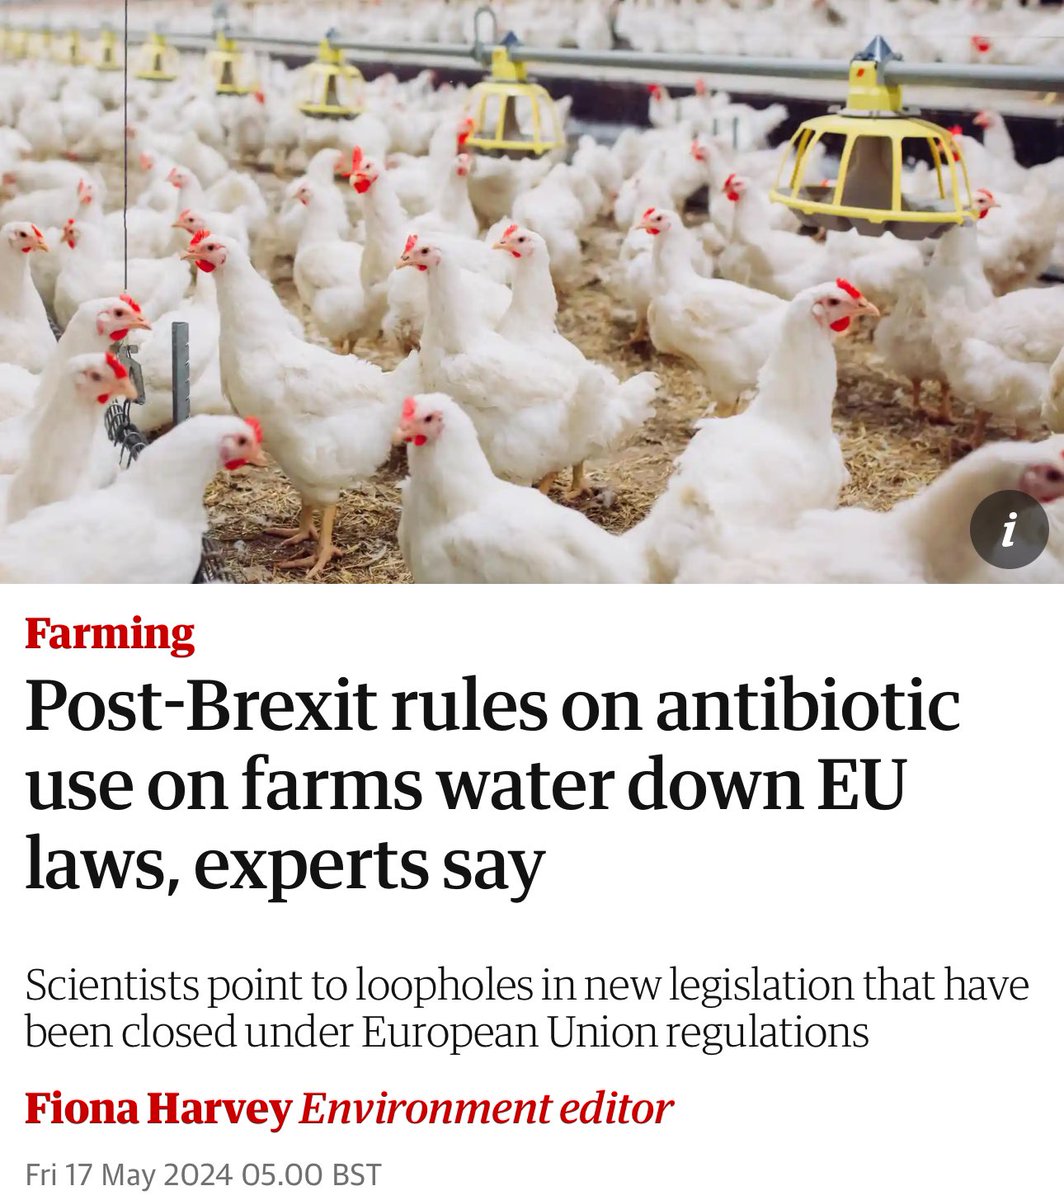 🐓 Ministers repeatedly promised, before and after Brexit, that farming and food standards in the UK would not be watered down after leaving the EU. They lied. 🐓 The govt has deliberately weakened the legislation in comparison to the EU, and this will allow some poorly run